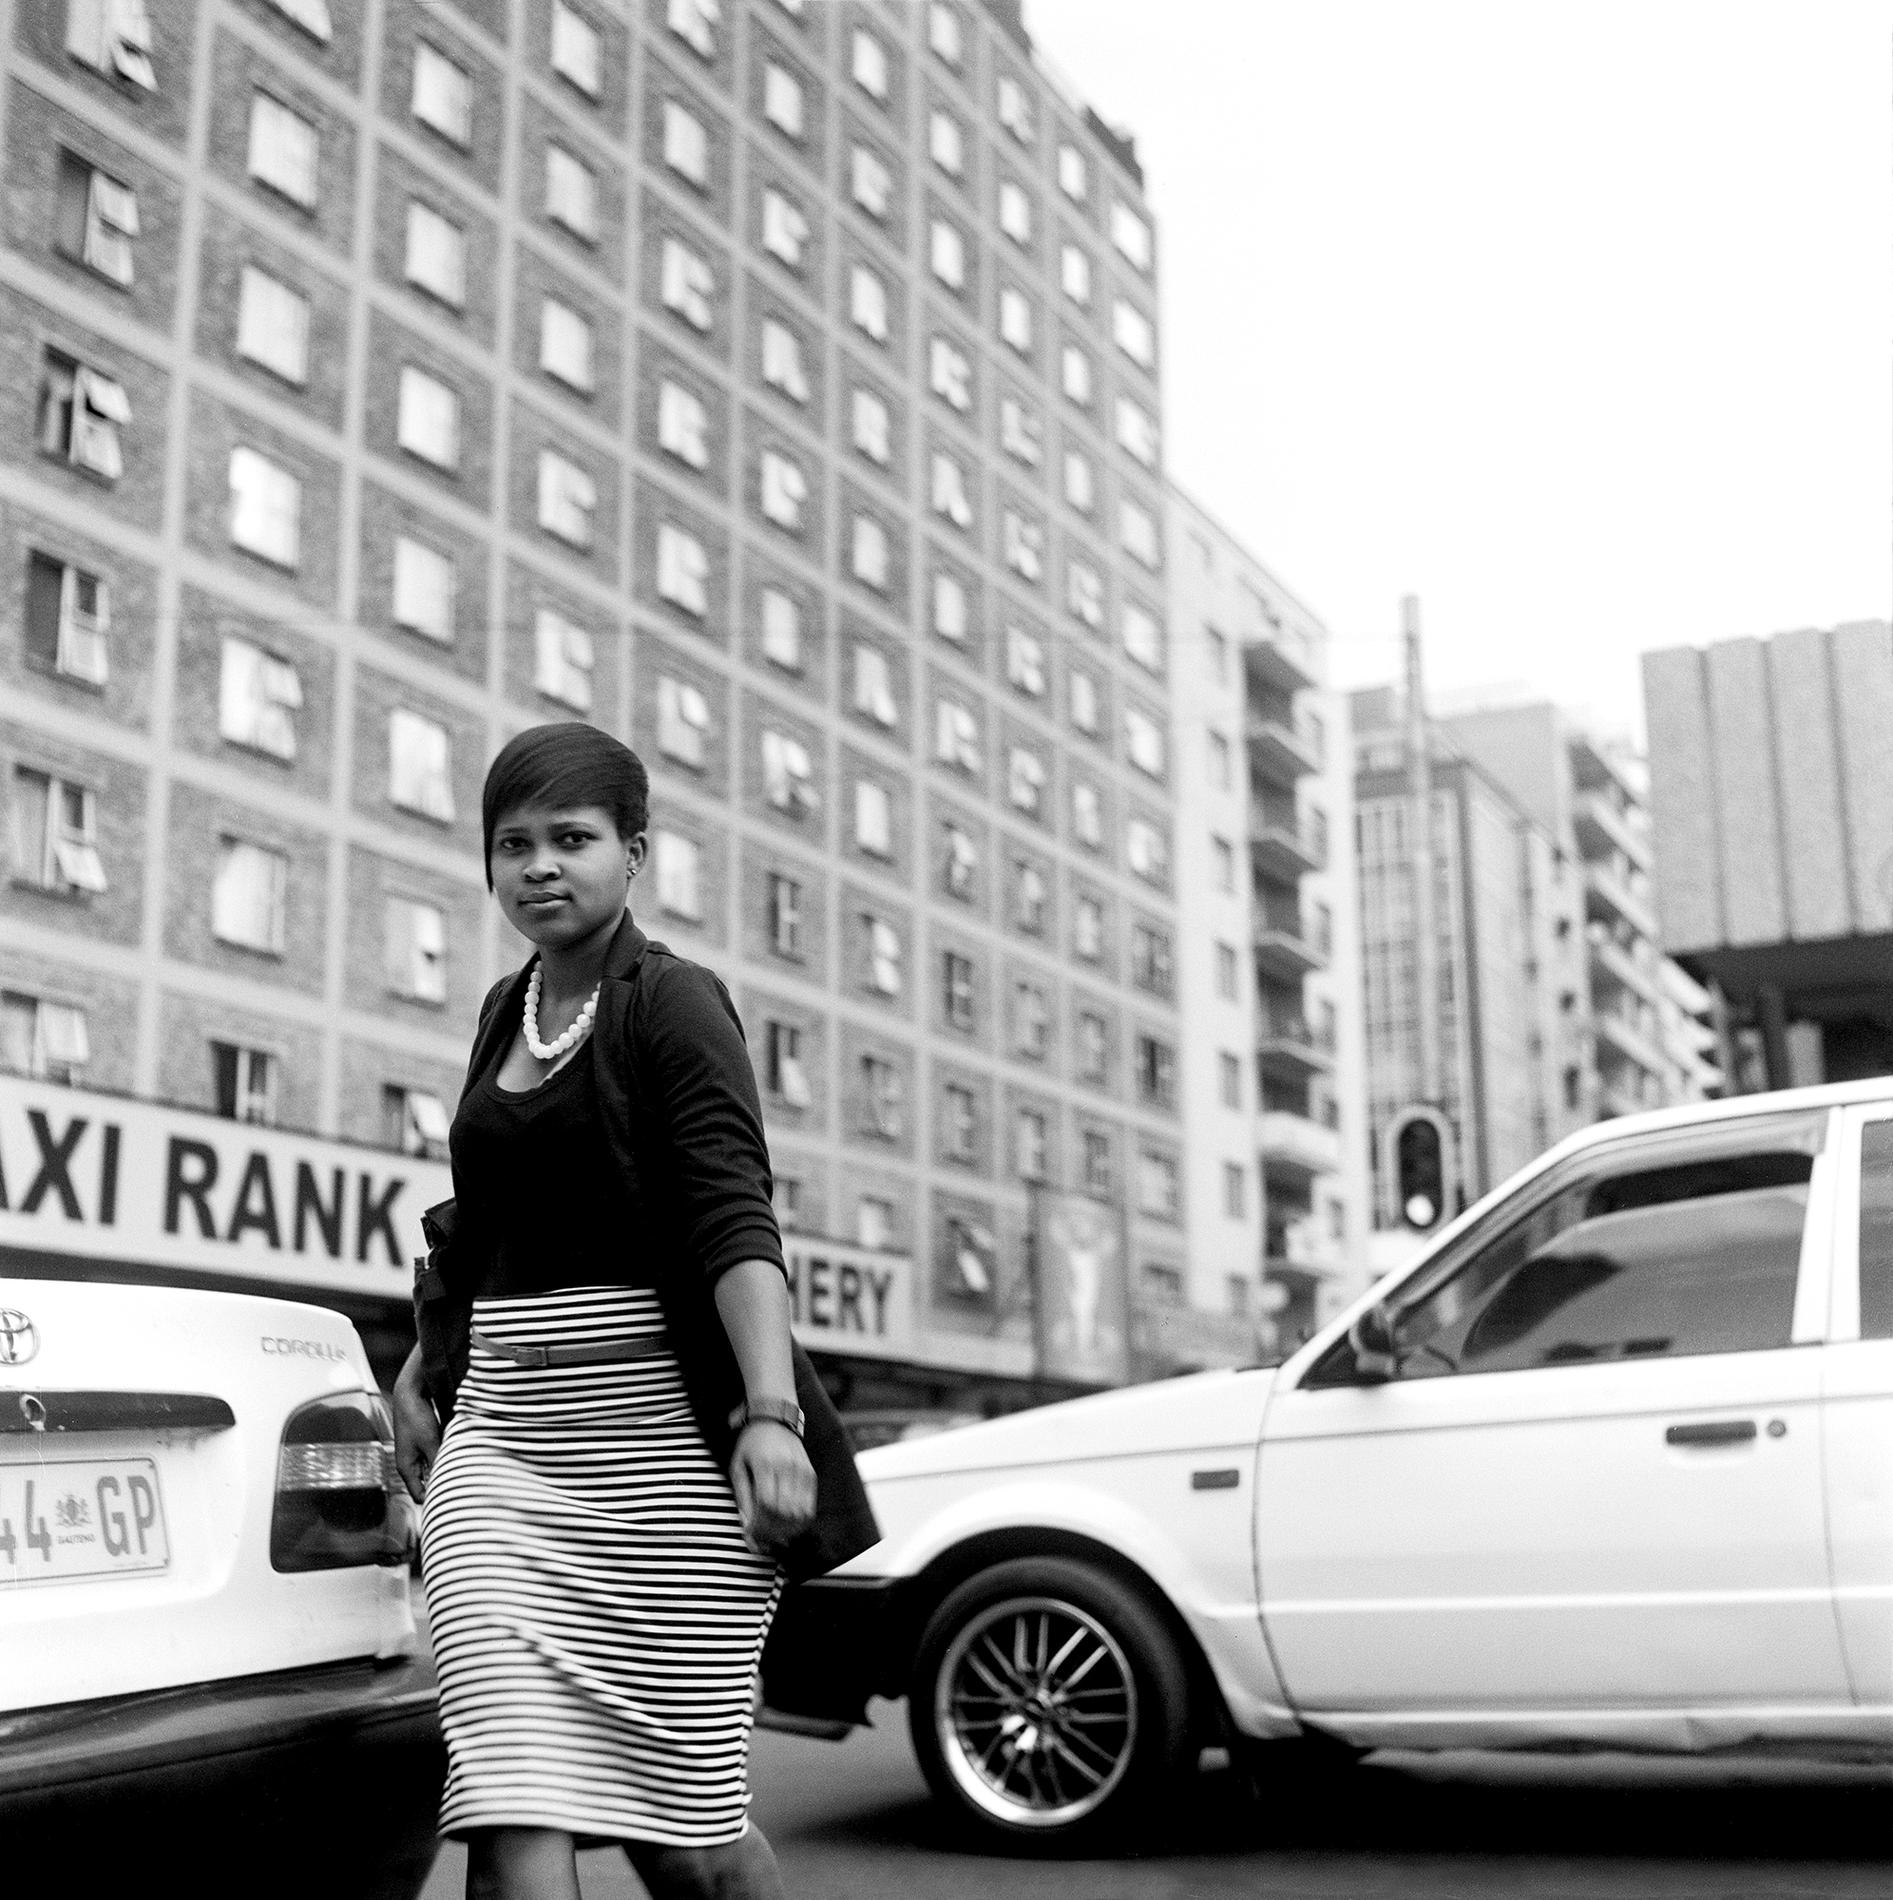 Black and white photo of a woman walking between cars amidst tall apartment buildings.